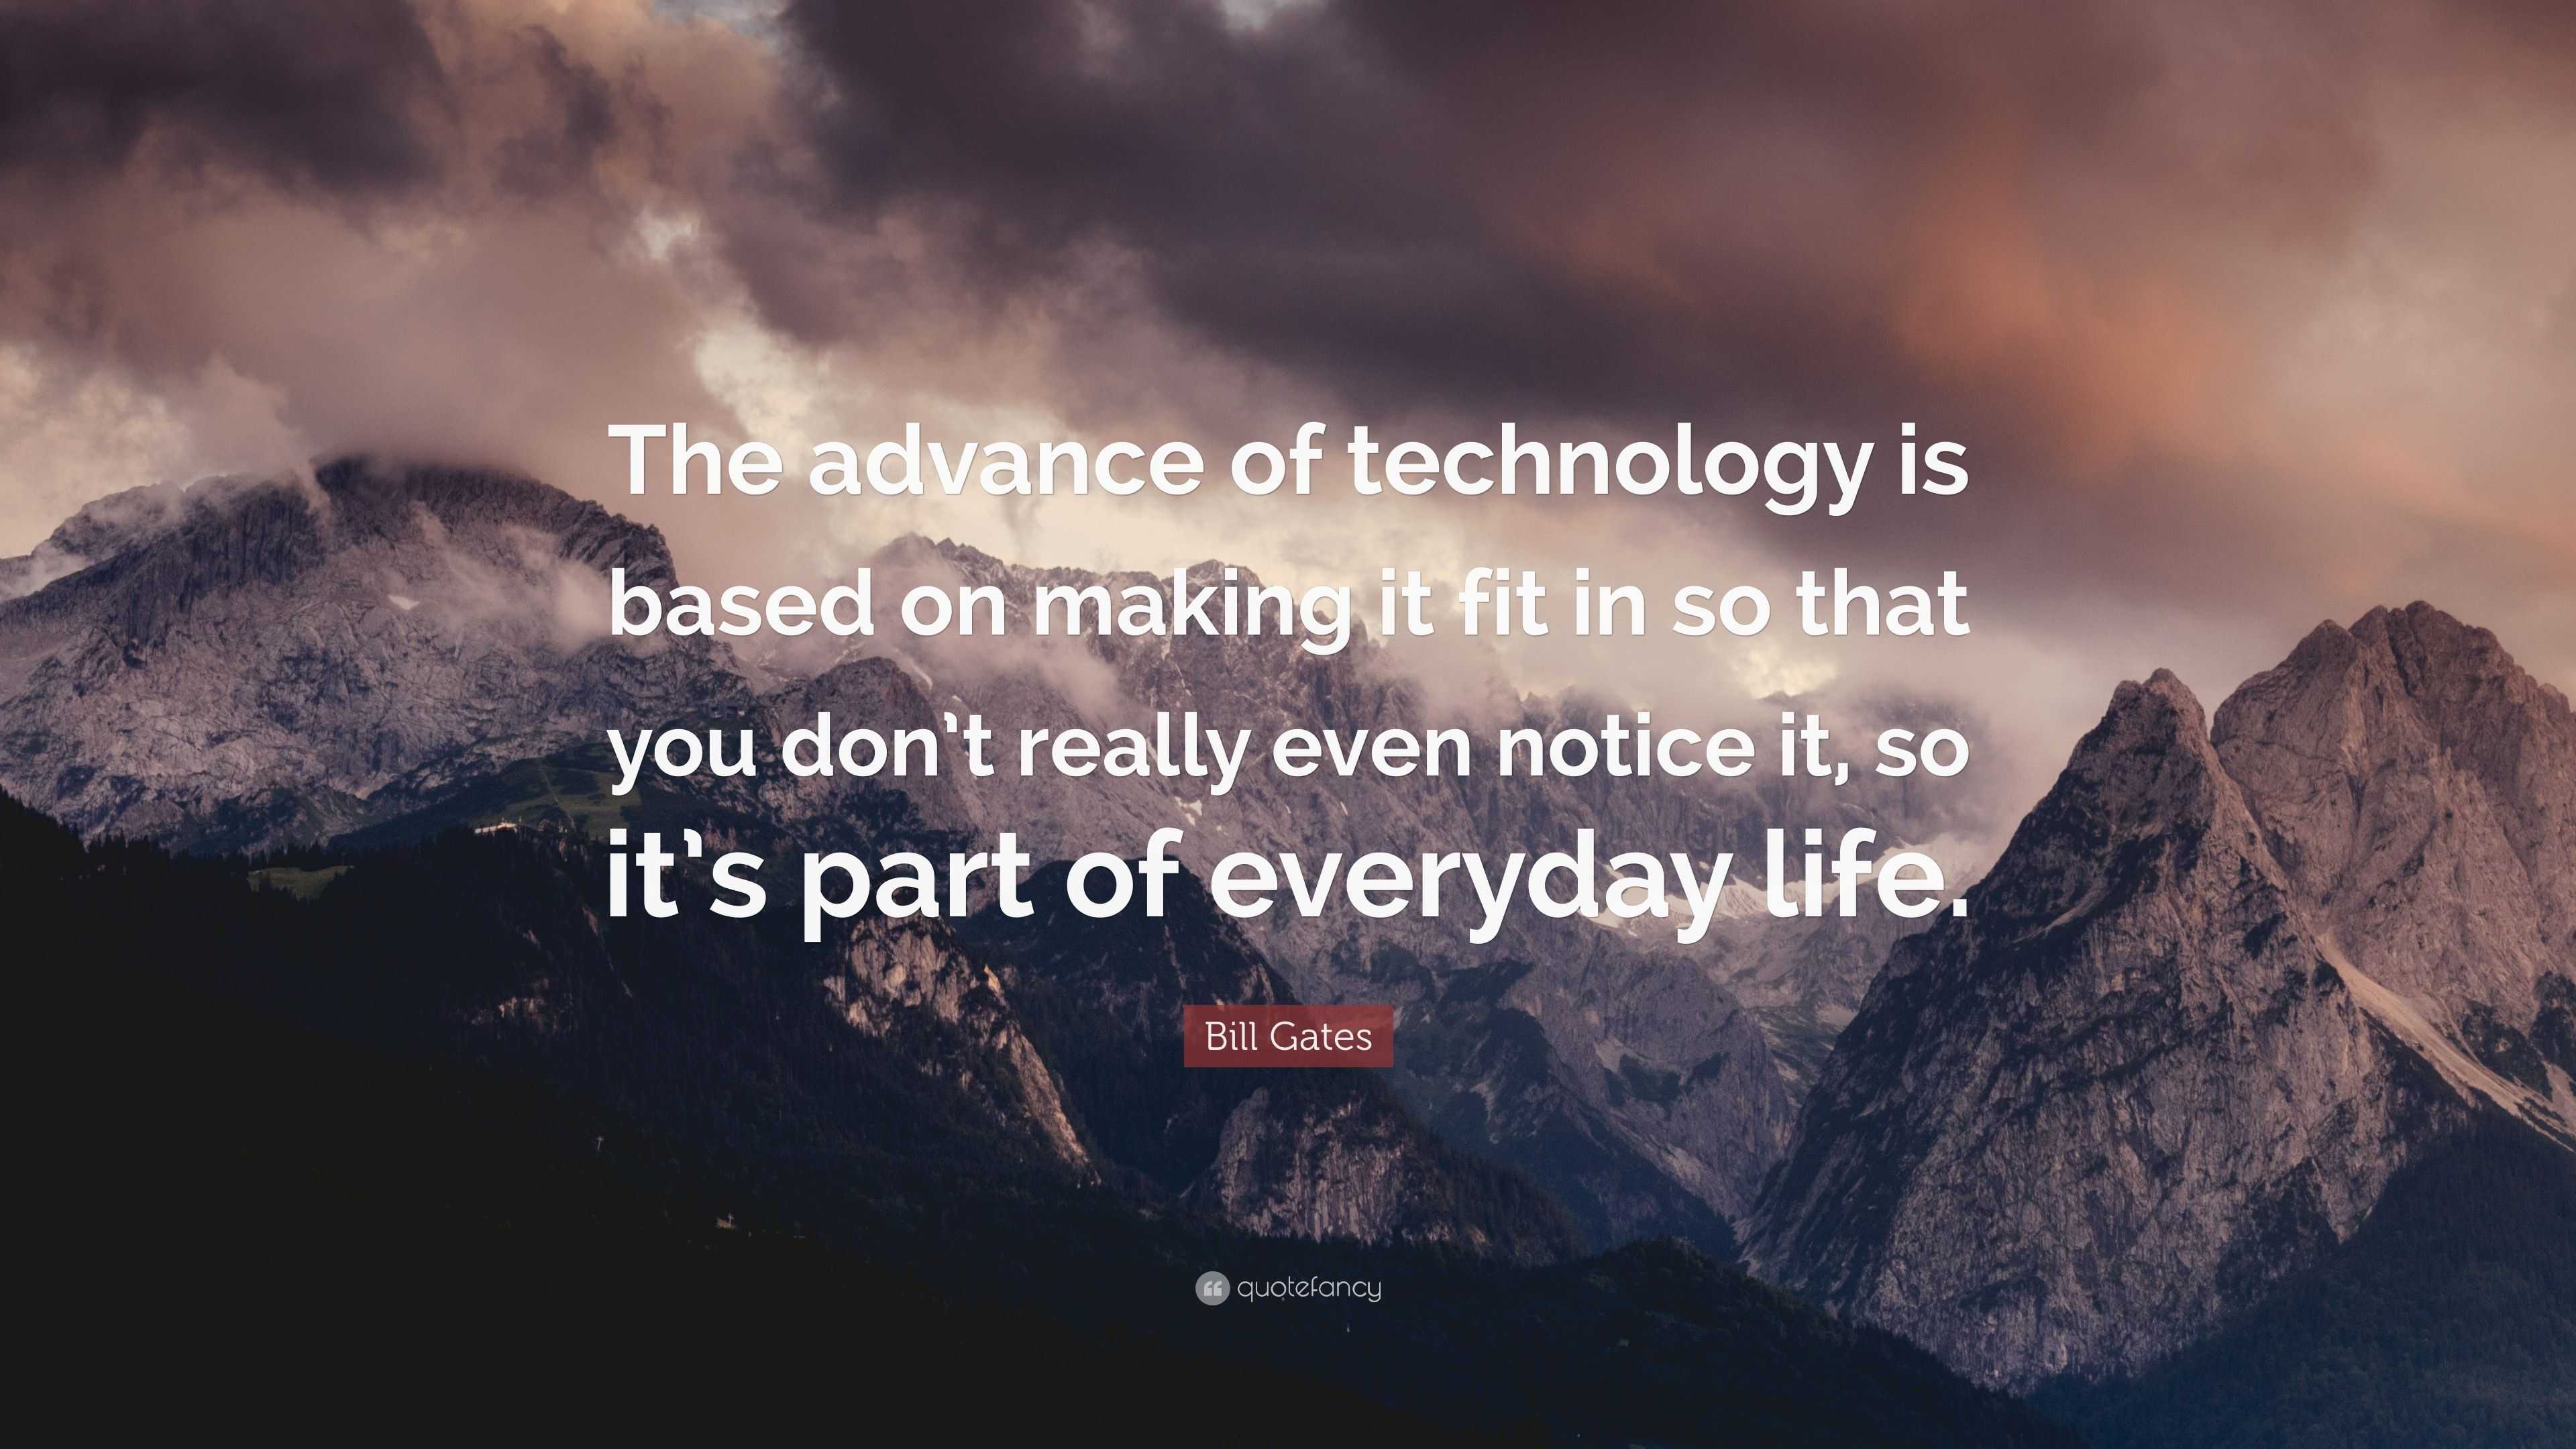 Bill Gates Quote: “The advance of technology is based on making it fit